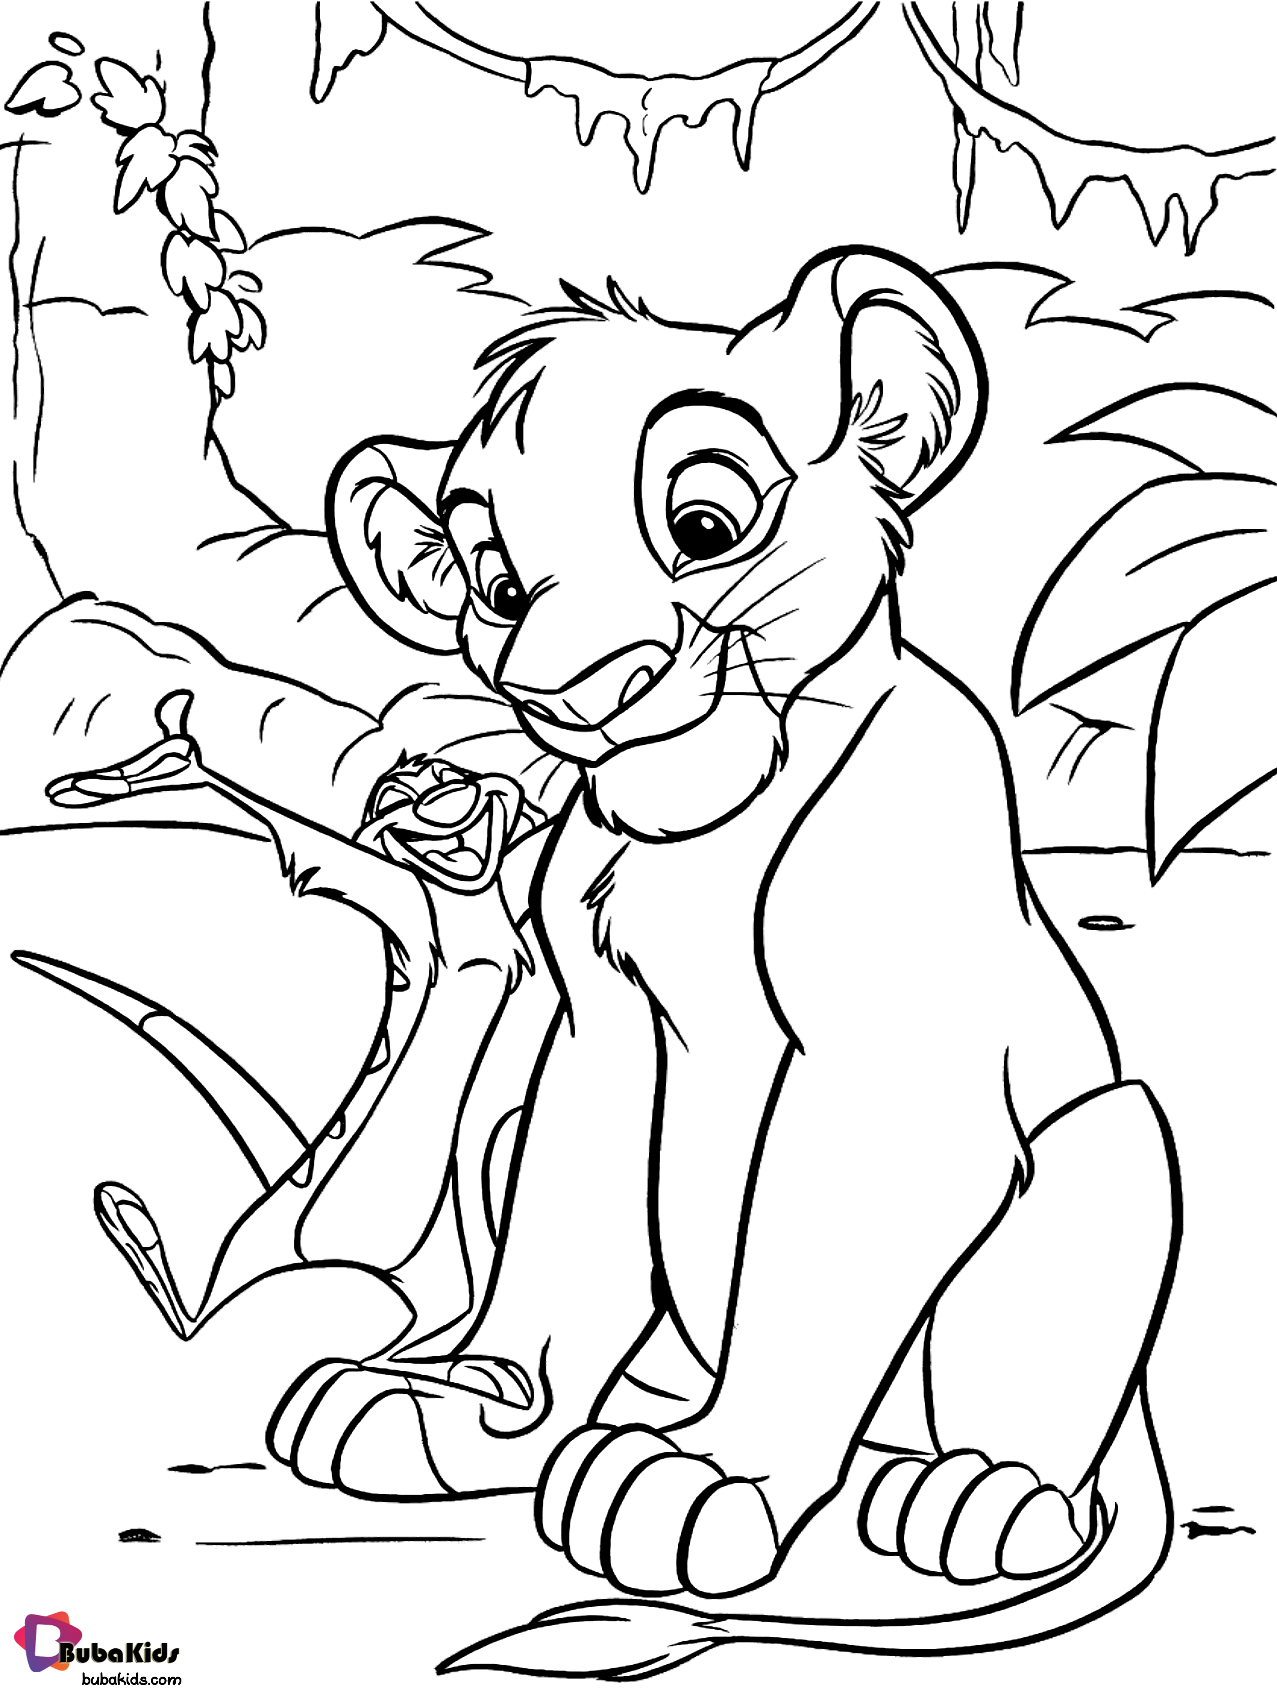 Simba The Lion King coloring page Wallpaper